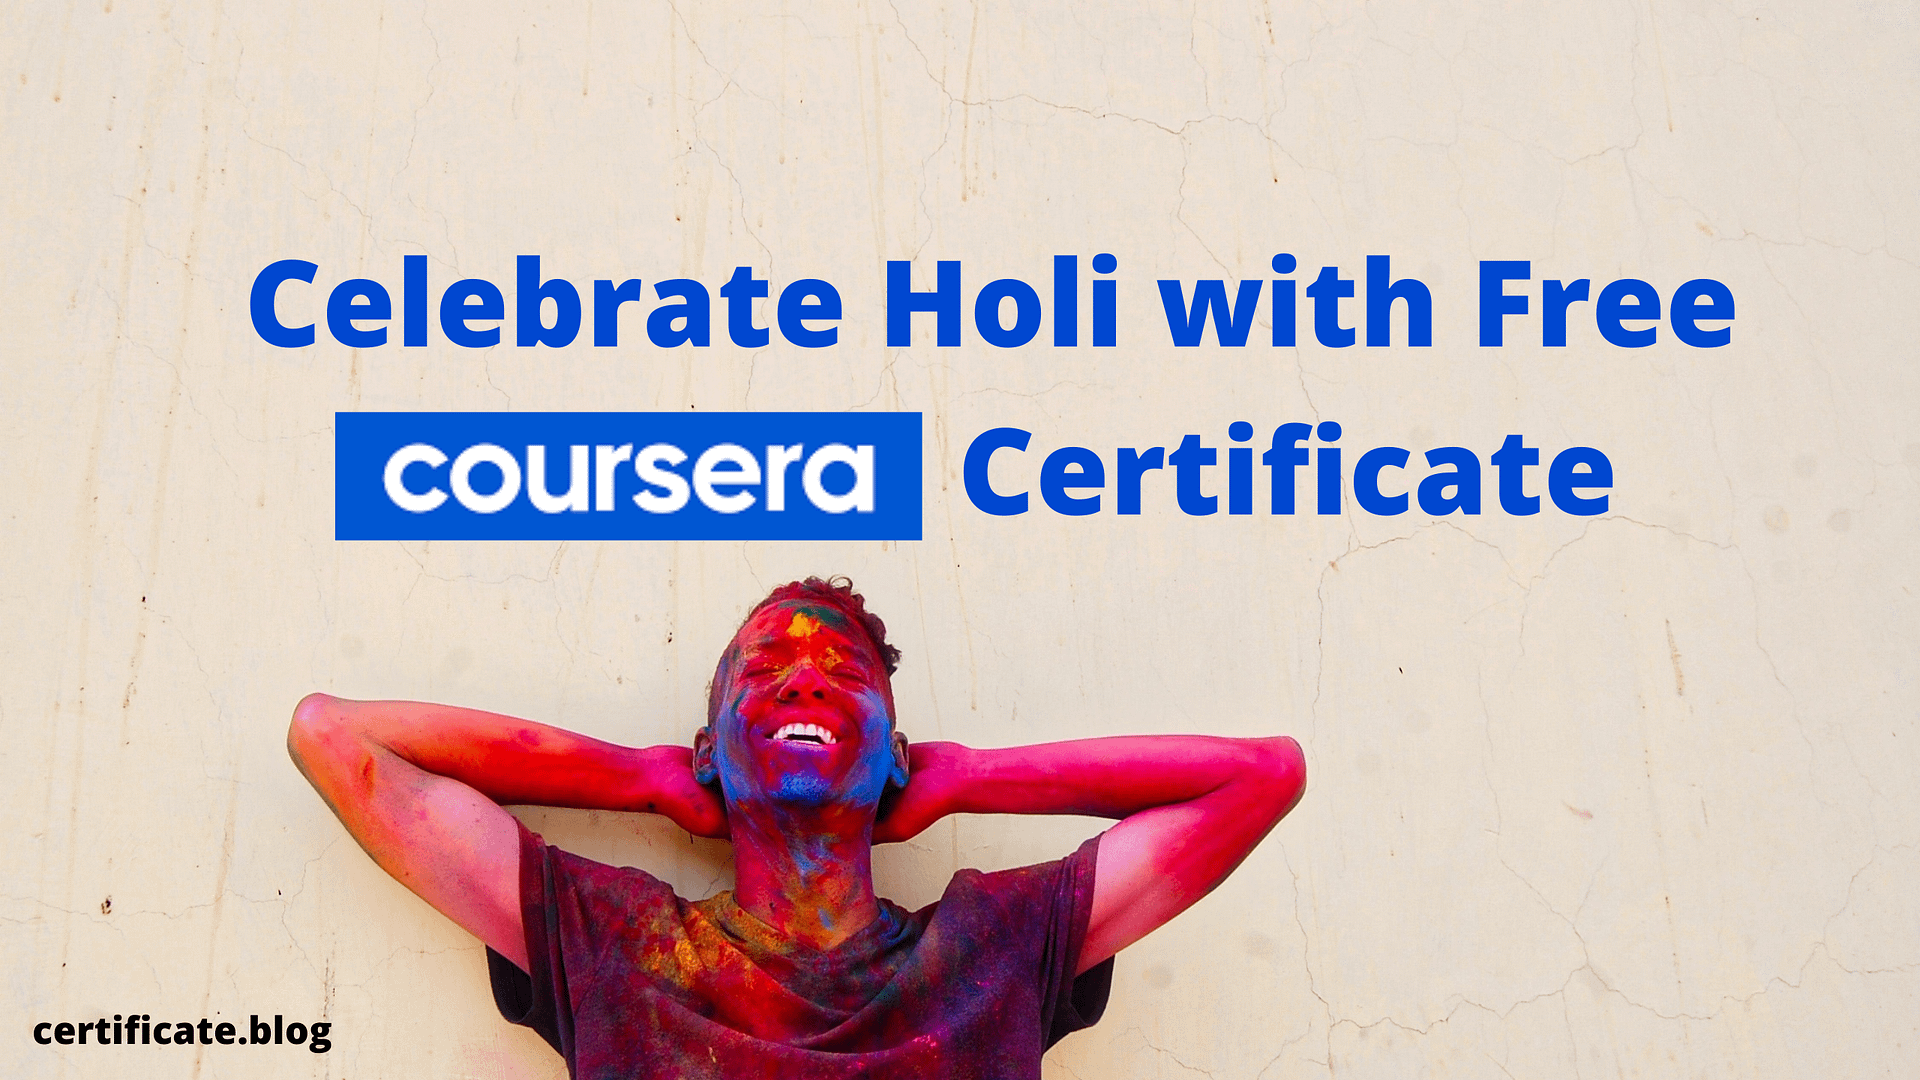 20 Free Coursera Certificate Courses to Celebrate Holi [Ends April 2]